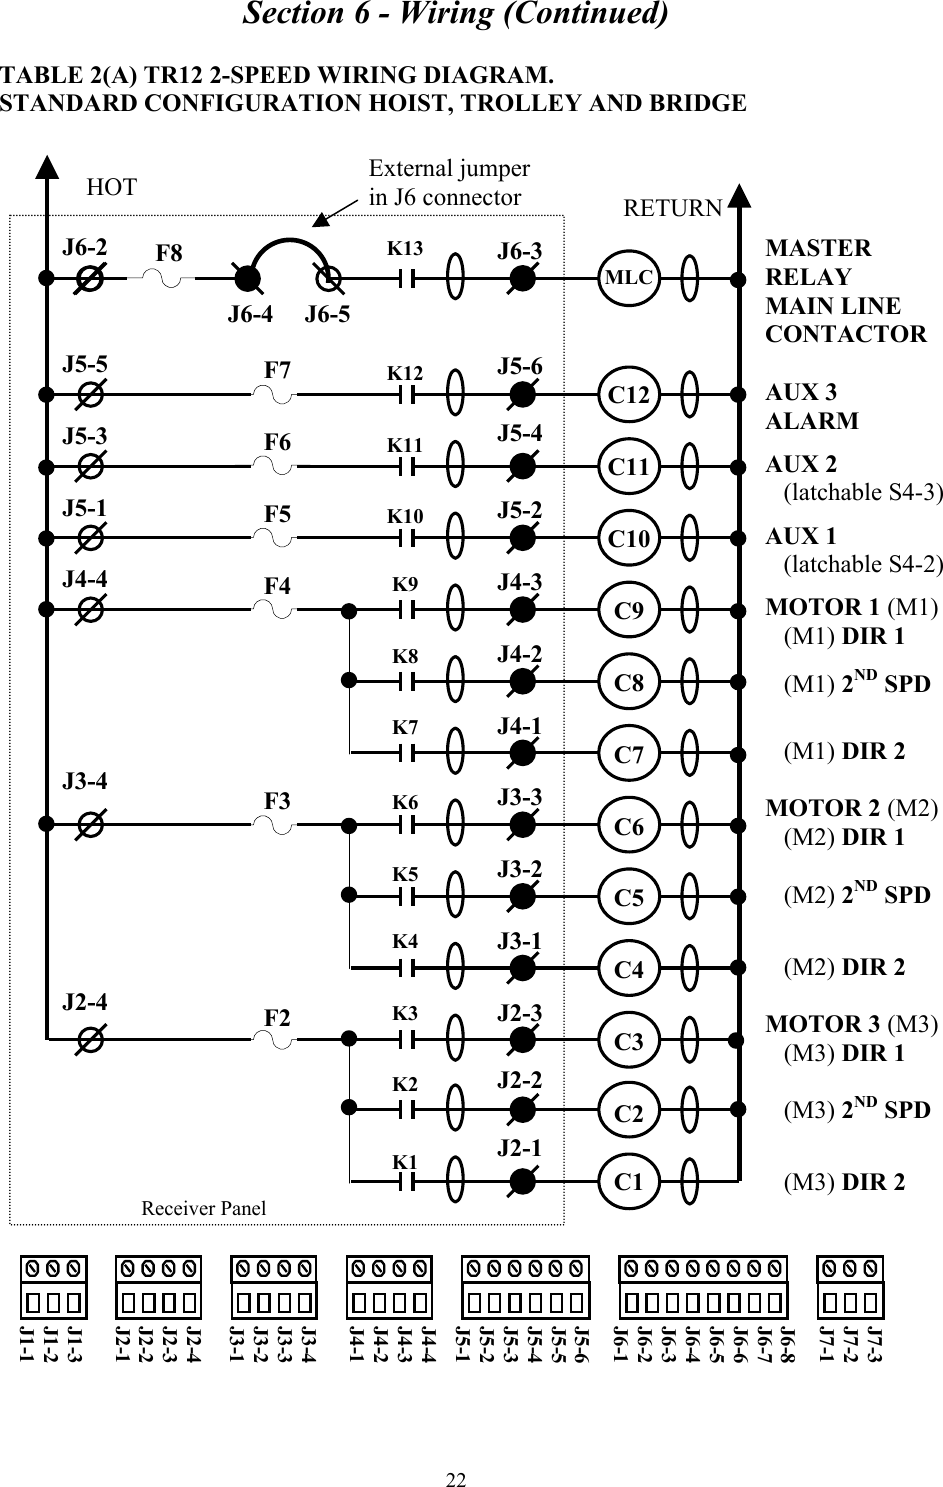 Section 6 - Wiring (Continued) 22 TABLE 2(A) TR12 2-SPEED WIRING DIAGRAM. STANDARD CONFIGURATION HOIST, TROLLEY AND BRIDGE   MASTER  RELAY MAIN LINE CONTACTOR  AUX 3 ALARM  AUX 2     (latchable S4-3)  AUX 1     (latchable S4-2)  MOTOR 1 (M1)    (M1) DIR 1     (M1) 2ND SPD      (M1) DIR 2  MOTOR 2 (M2)    (M2) DIR 1     (M2) 2ND SPD     (M2) DIR 2  MOTOR 3 (M3)    (M3) DIR 1     (M3) 2ND SPD     (M3) DIR 2       Receiver Panel J6-2    J5-5  J5-3  J5-1  J4-4      J3-4        J2-4 J6-3    J5-6  J5-4   J5-2  J4-3  J4-2  J4-1  J3-3  J3-2  J3-1  J2-3  J2-2  J2-1 HOT  RETURN K13     K12   K11   K10   K9   K8   K7   K6   K5   K4   K3   K2   K1 MLC    C12  C11  C10  C9  C8  C7  C6  C5  C4  C3  C2  C1     F7  F6  F5  F4      F3        F2  J7-3 J7-2 J7-1  J6-8 J6-7 J6-6 J6-5 J6-4 J6-3 J6-2 J6-1   J5-6 J5-5 J5-4 J5-3 J5-2 J5-1  J4-4 J4-3 J4-2 J4-1  J3-4 J3-3 J3-2 J3-1  J2-4 J2-3 J2-2 J2-1  J1-3 J1-2 J1-1 External jumper in J6 connector J6-4     J6-5 F8 